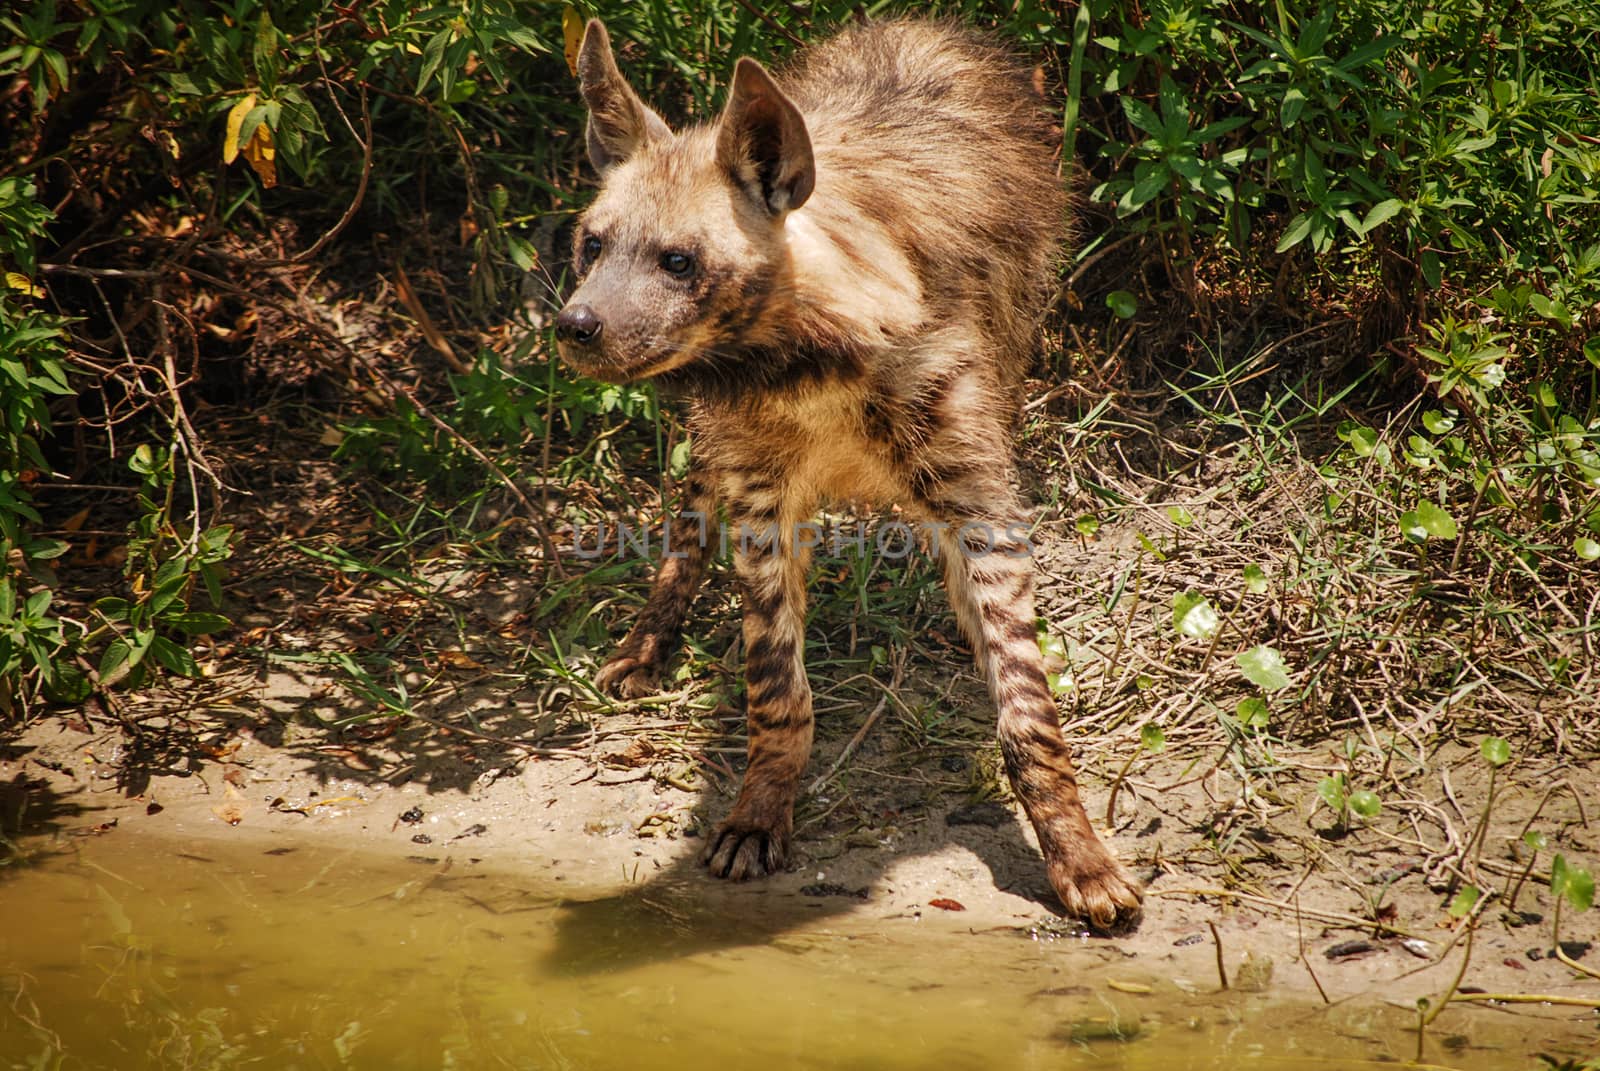 Portrait of a Hyena by Charidy